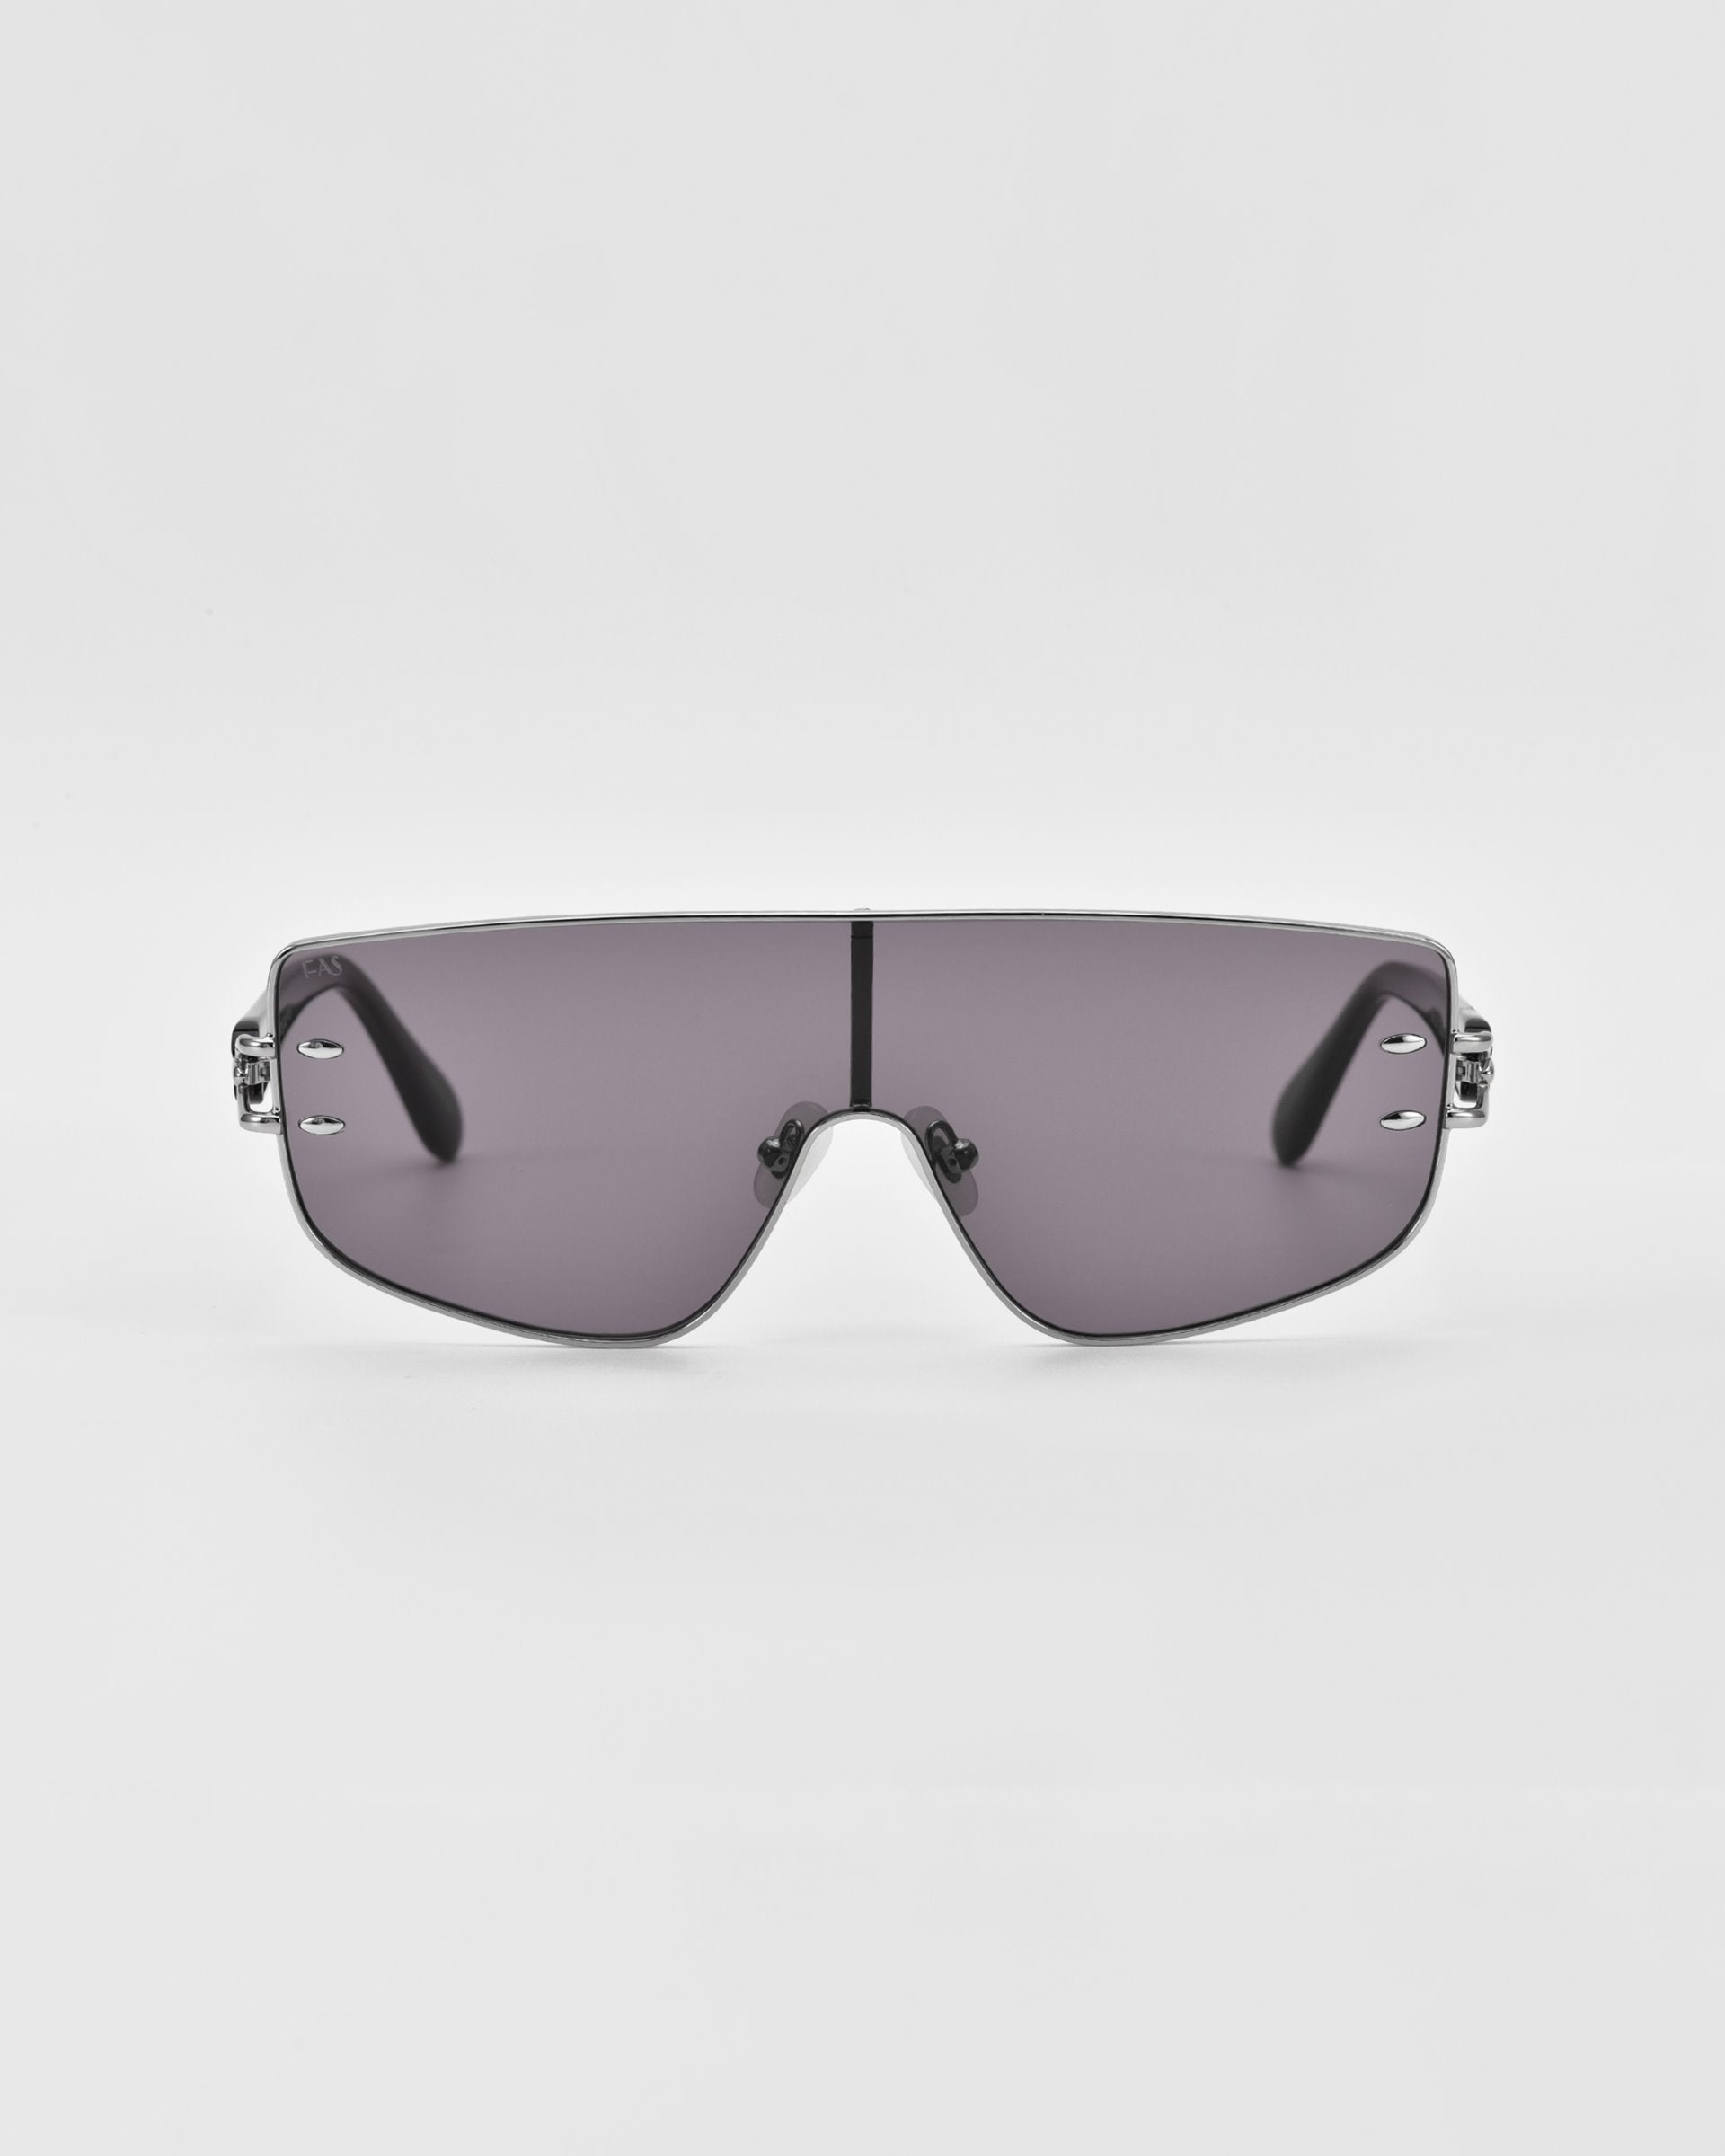 Introducing the Flare sunglasses by For Art's Sake®—a pair of futuristic-style luxury eyewear featuring a single, continuous gray-tinted lens and thin, black arms. The minimalistic nose bridge complements the sleek, slightly curved design of the lens. Set against a plain white background, these are the epitome of modern elegance.